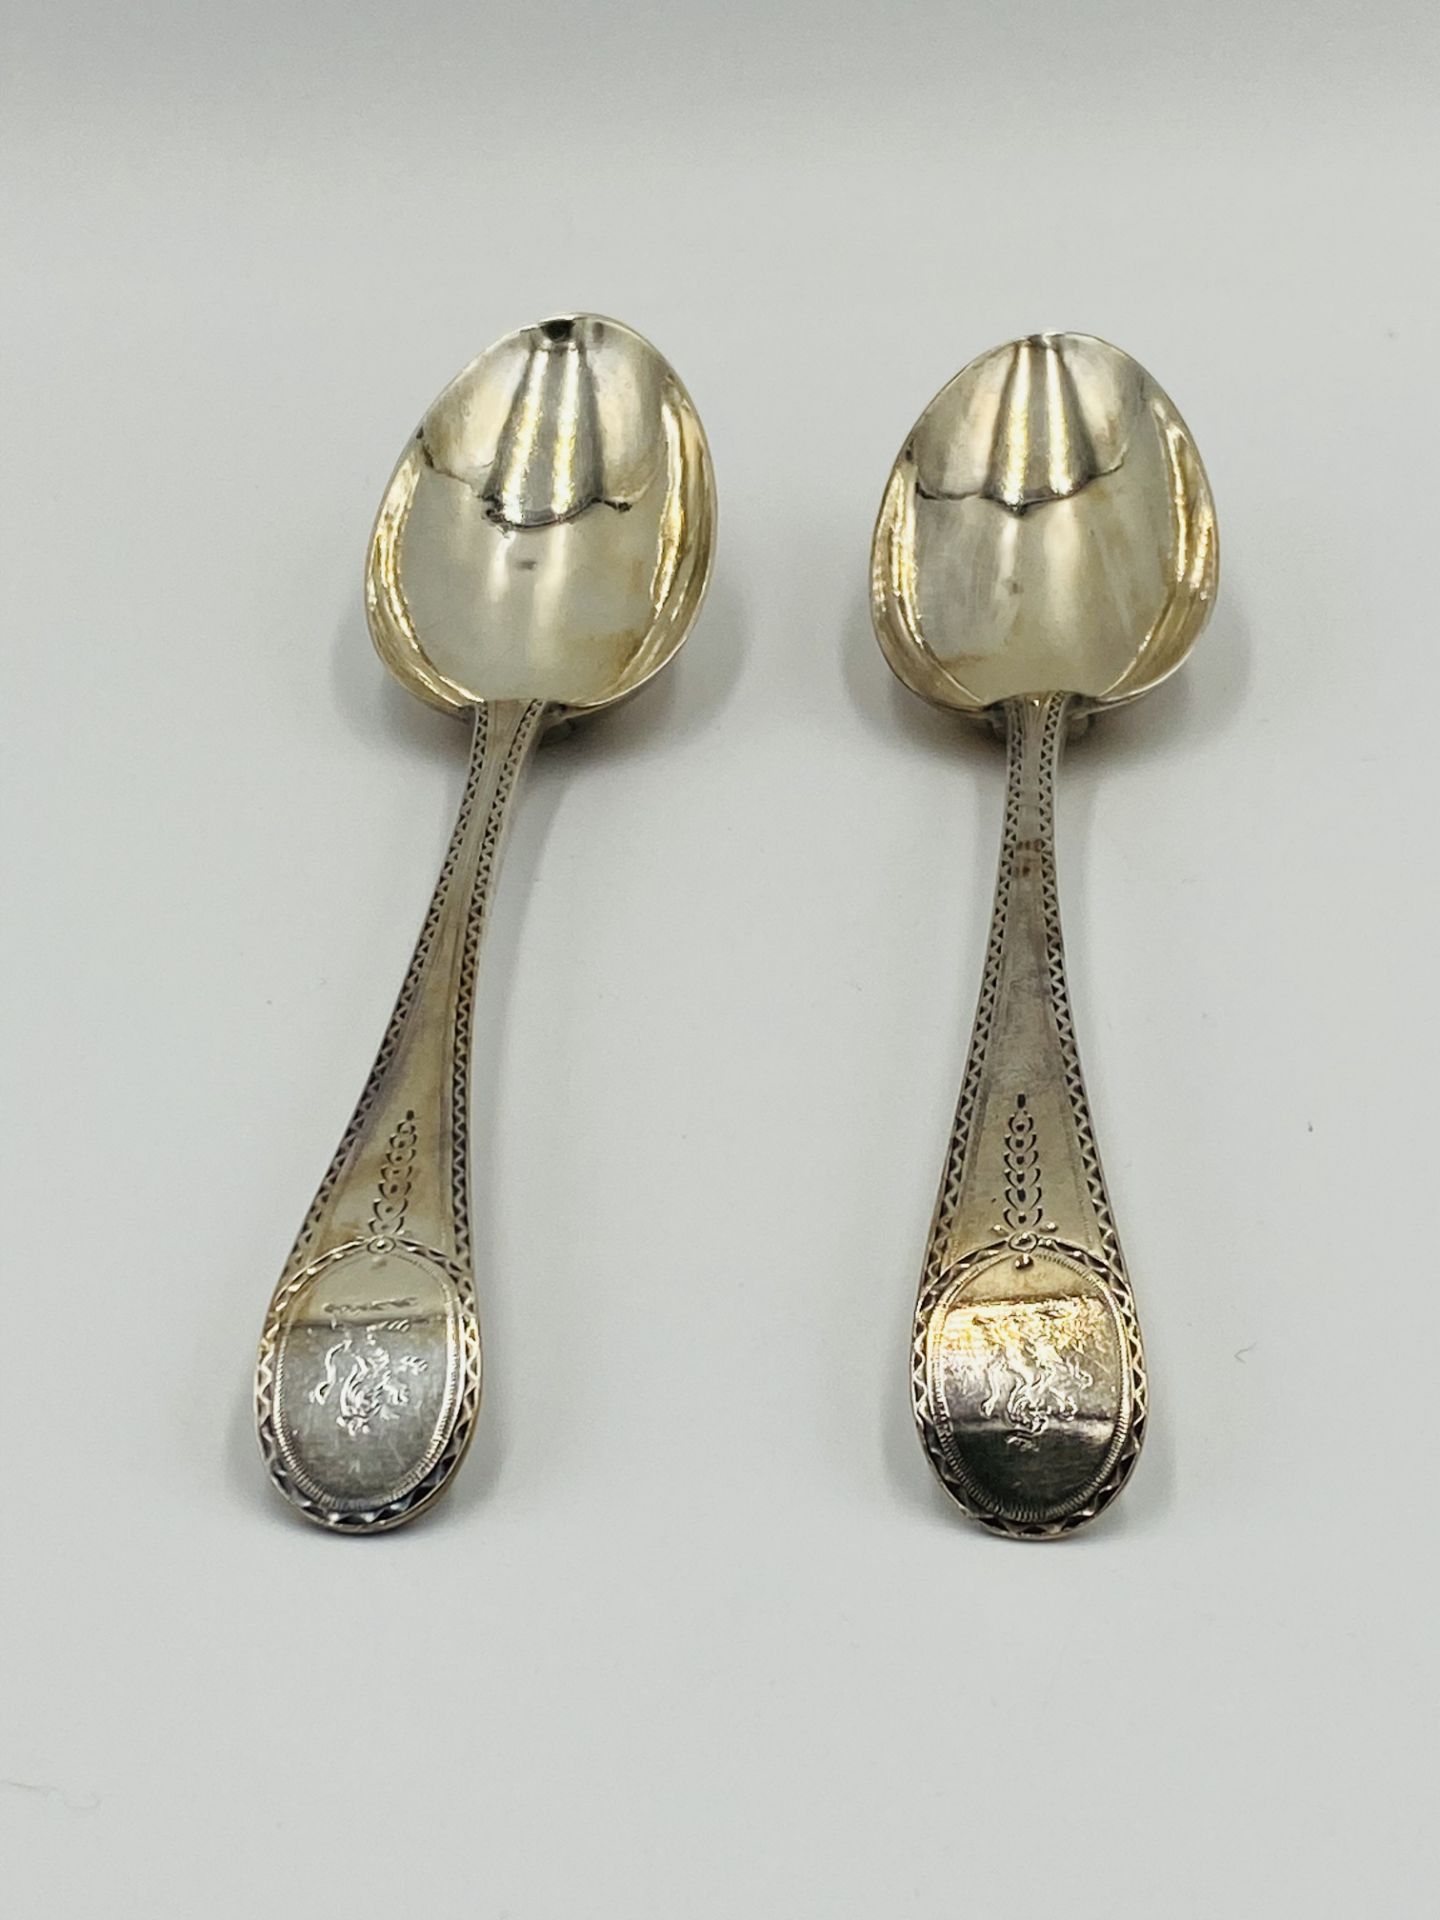 A pair of mid 18th century silver Old English pattern table spoons by Hester Bateman - Image 4 of 6